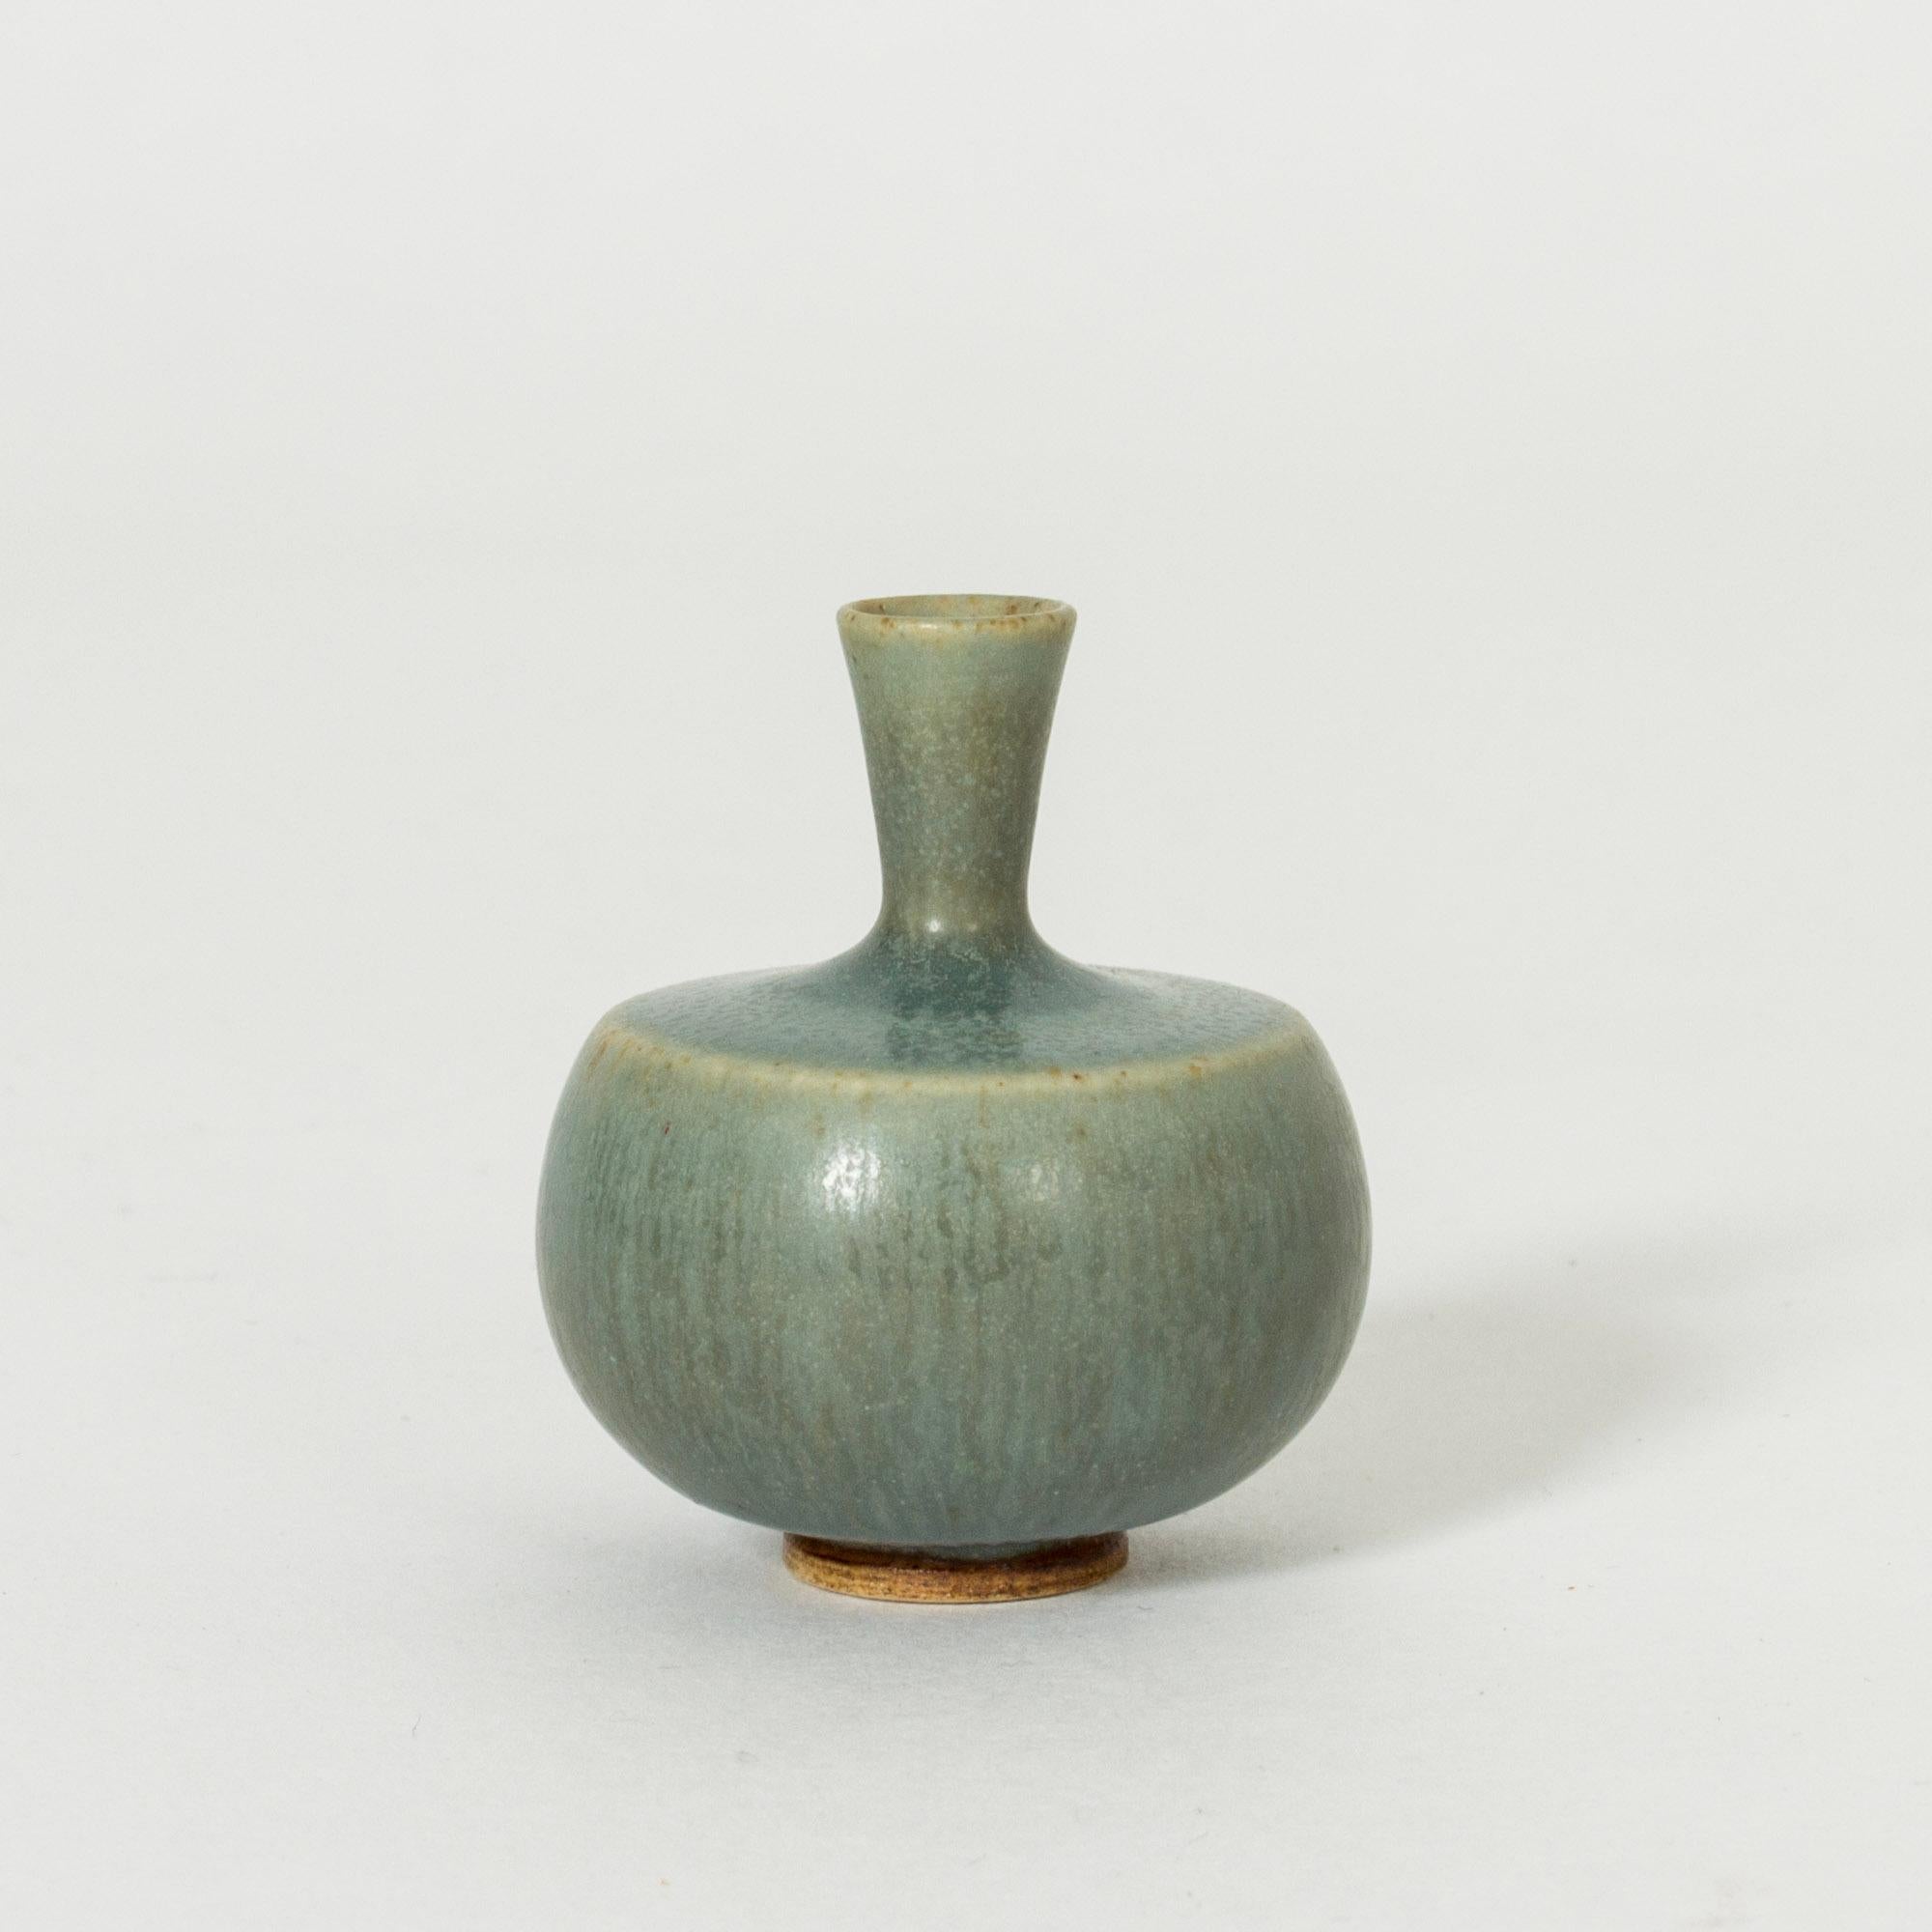 Lovely tiny stoneware vase by Berndt Friberg, in a compact form with celadon green hare’s fur glaze.

Berndt Friberg was a Swedish ceramicist, renowned for his stoneware vases and vessels for Gustavsberg. His pure, composed designs with satiny,